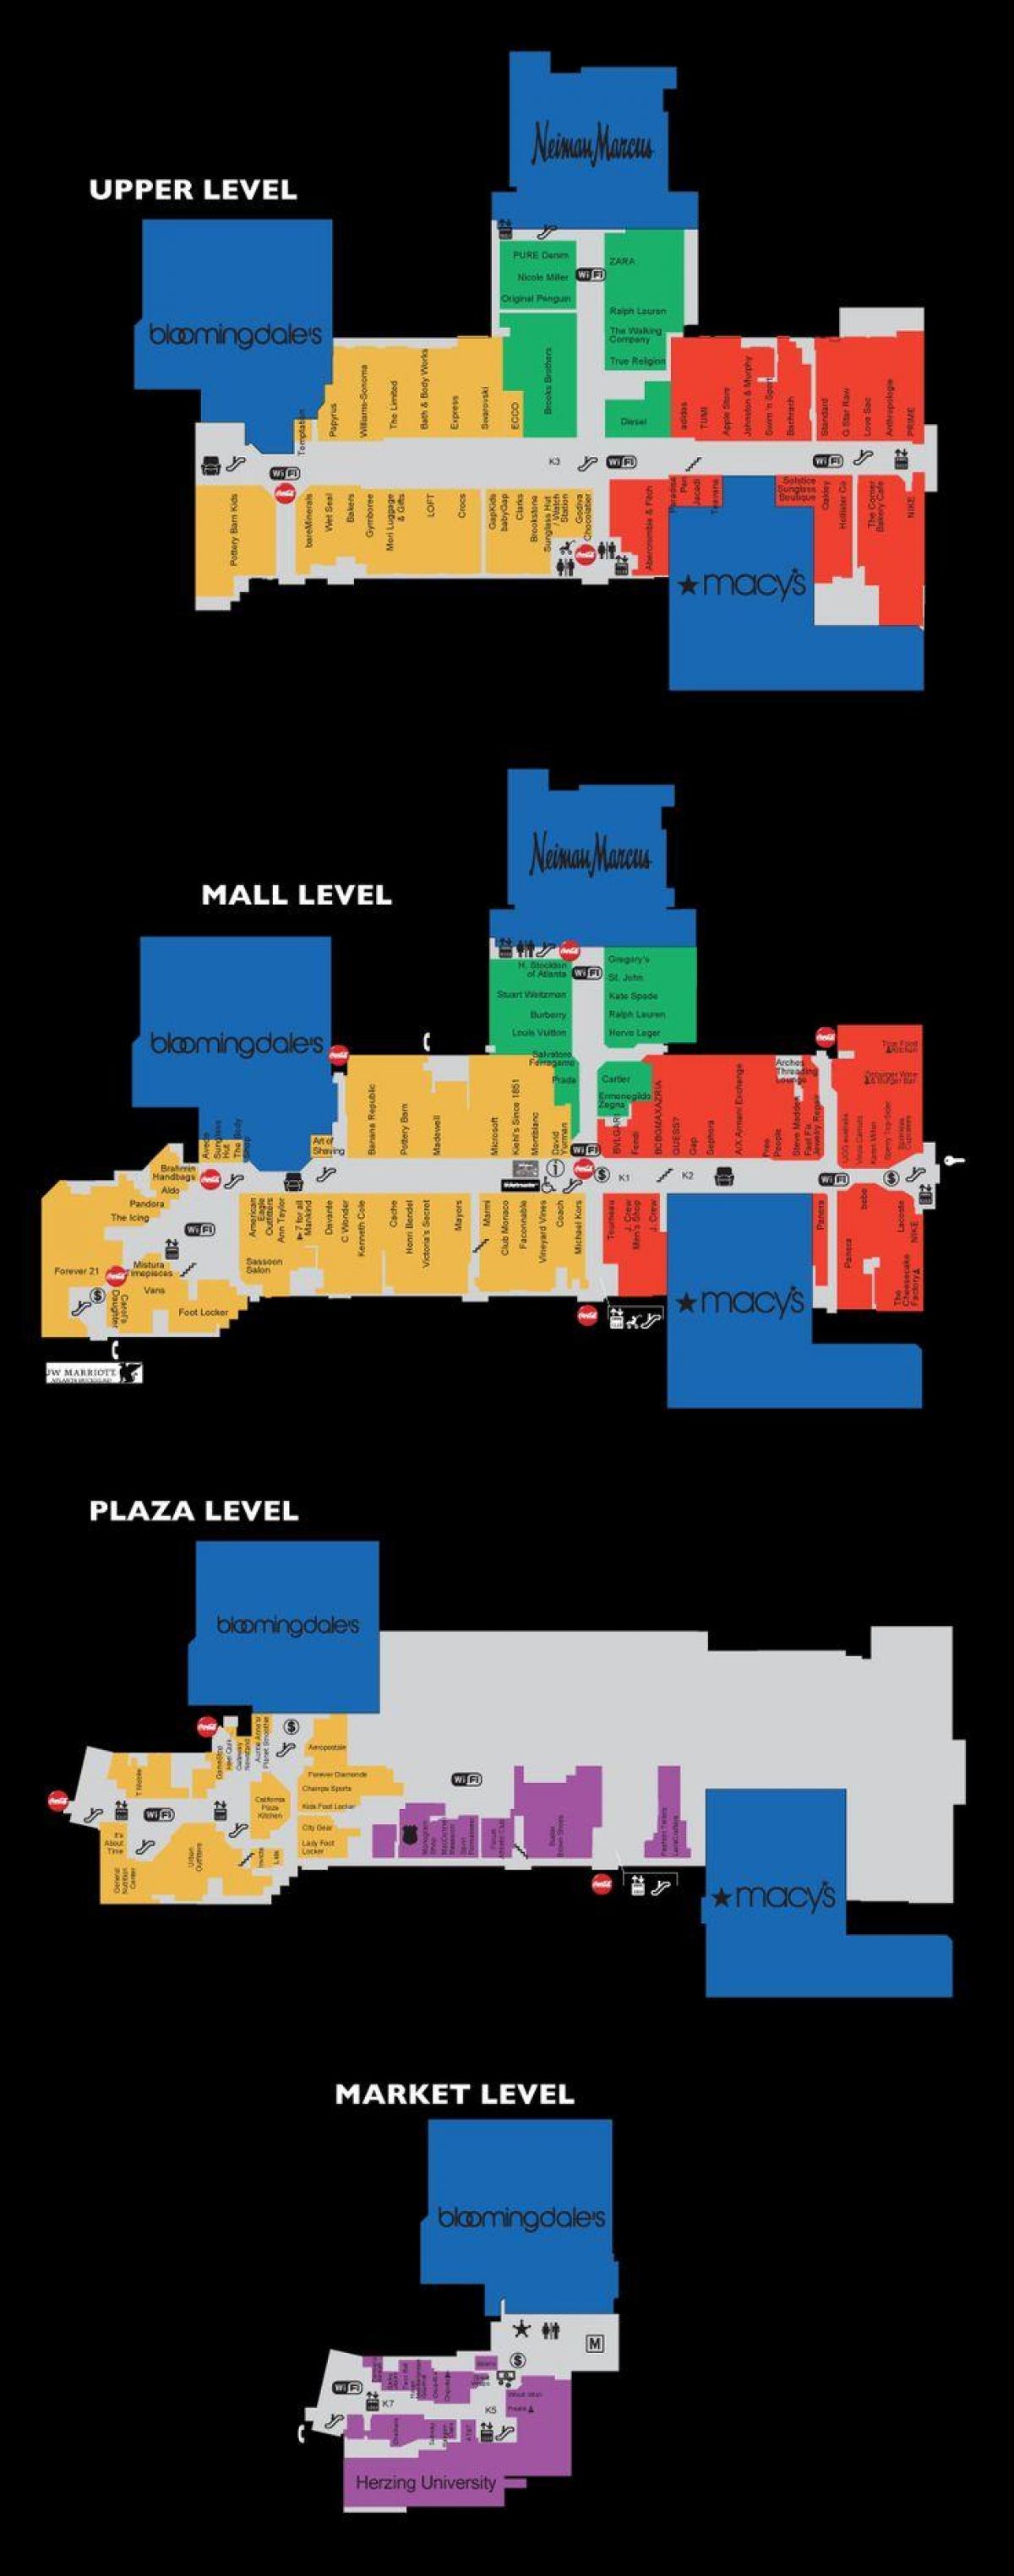 Lenox Square Mall, Mall directory and wayfinding - - - - - …